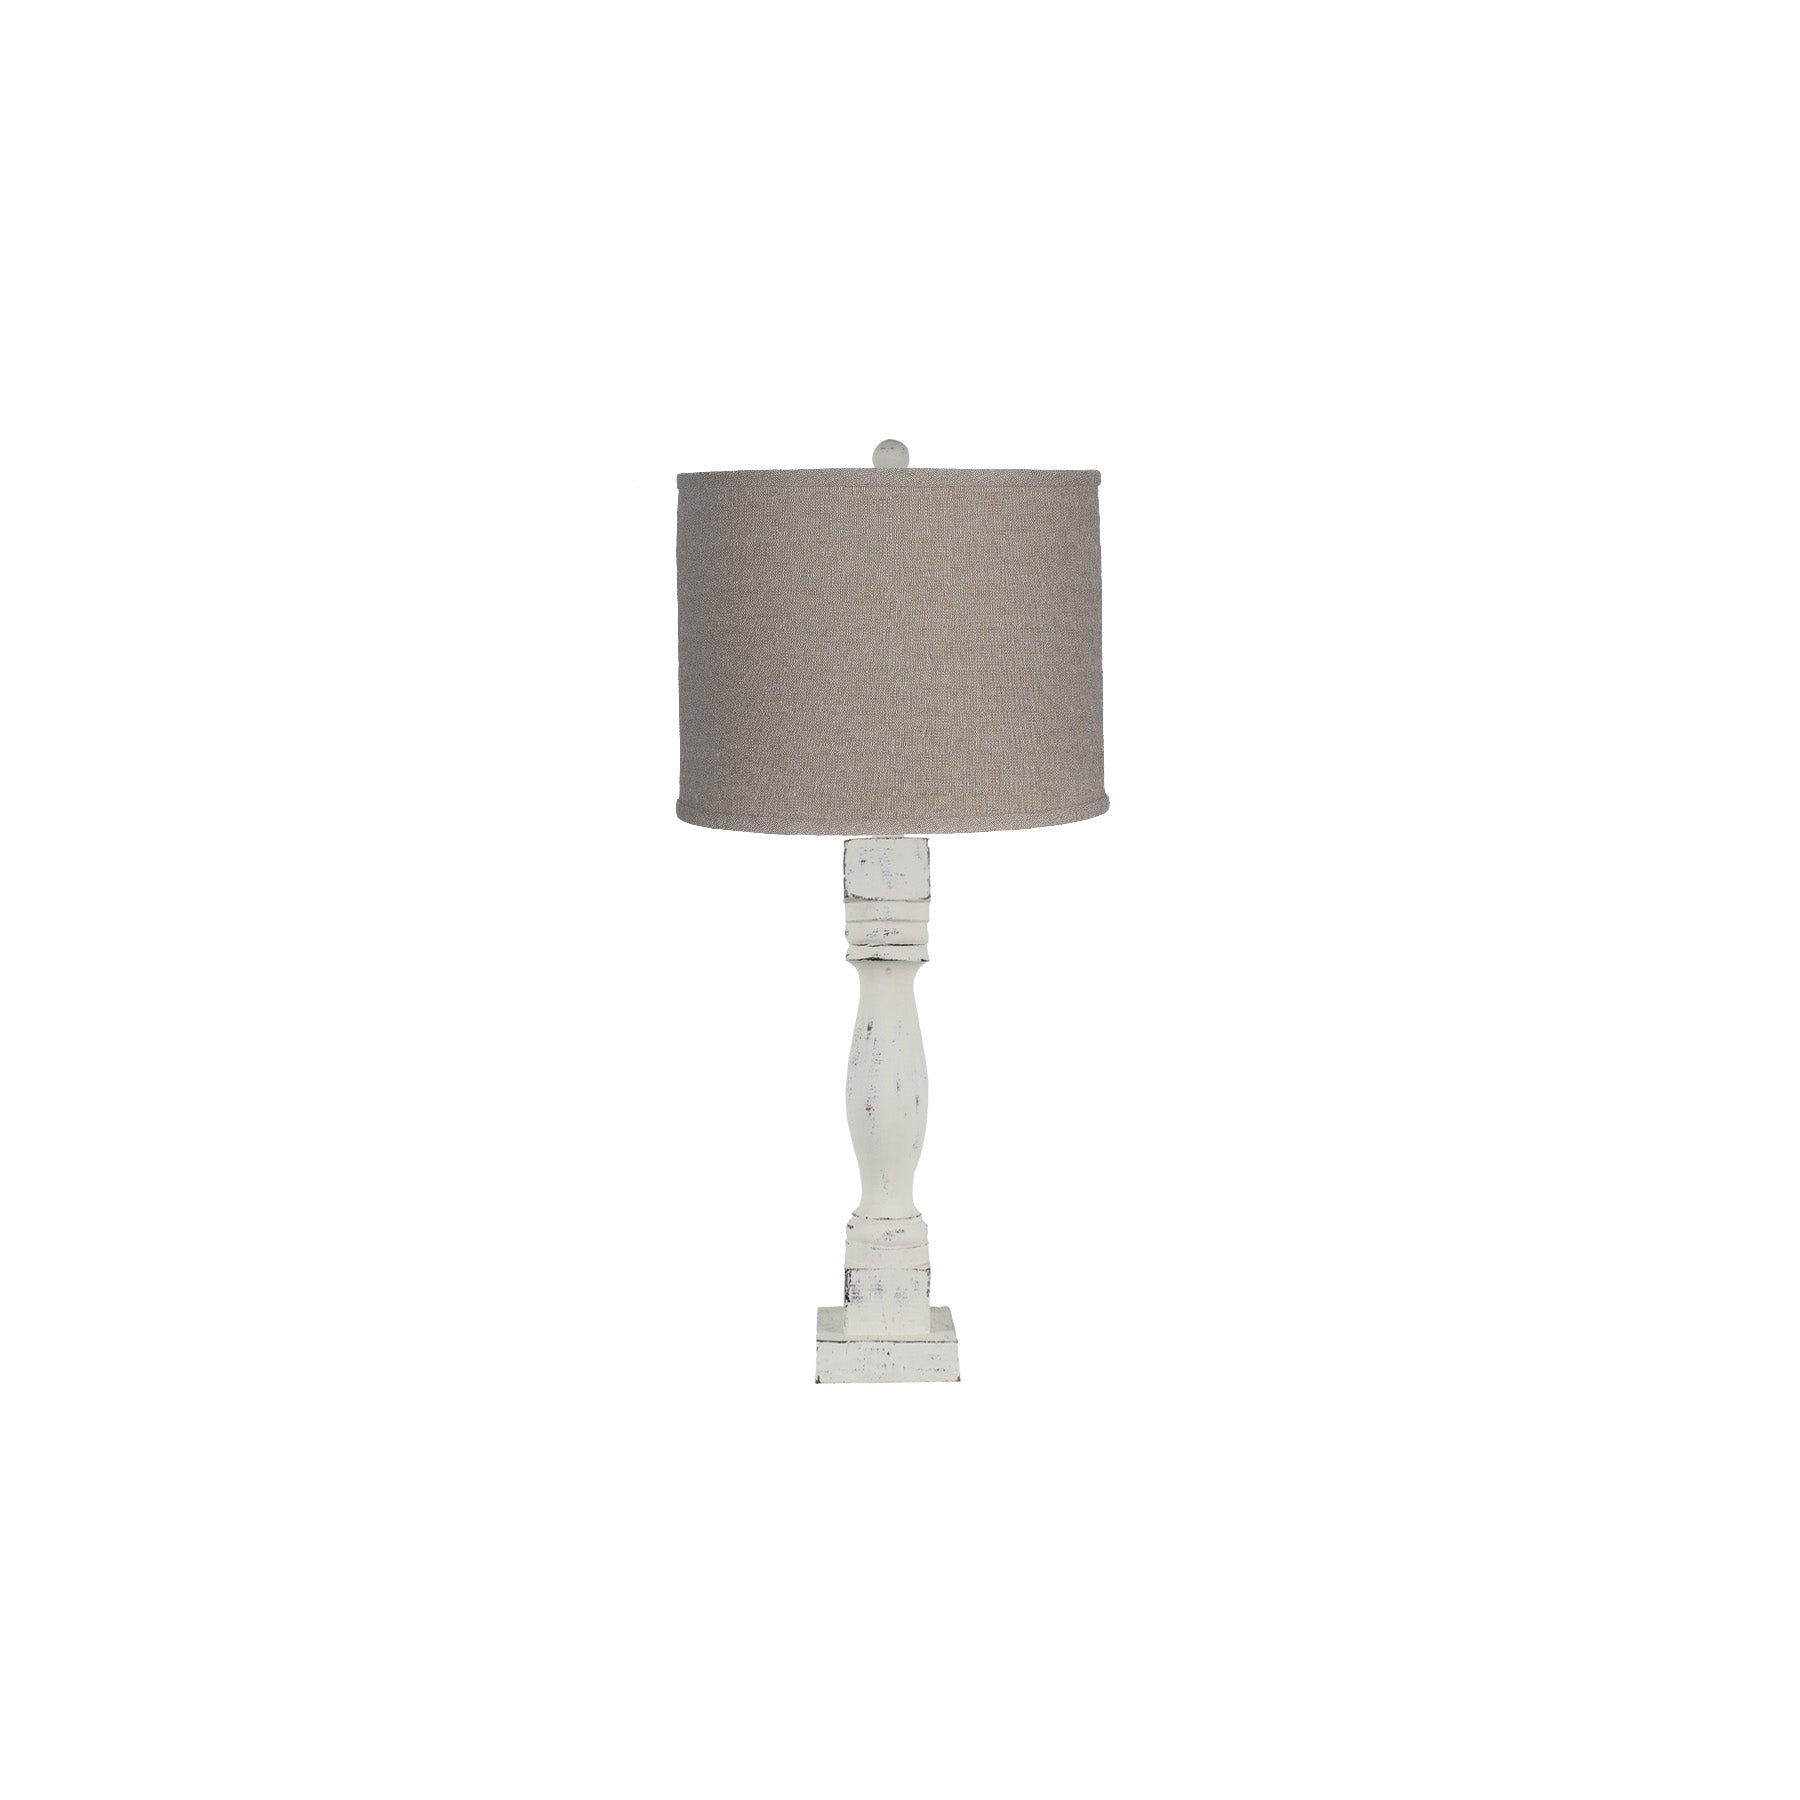 Distressed White Table Lamp With Neutral Fabric Shade - Tuesday Morning-Table Lamps